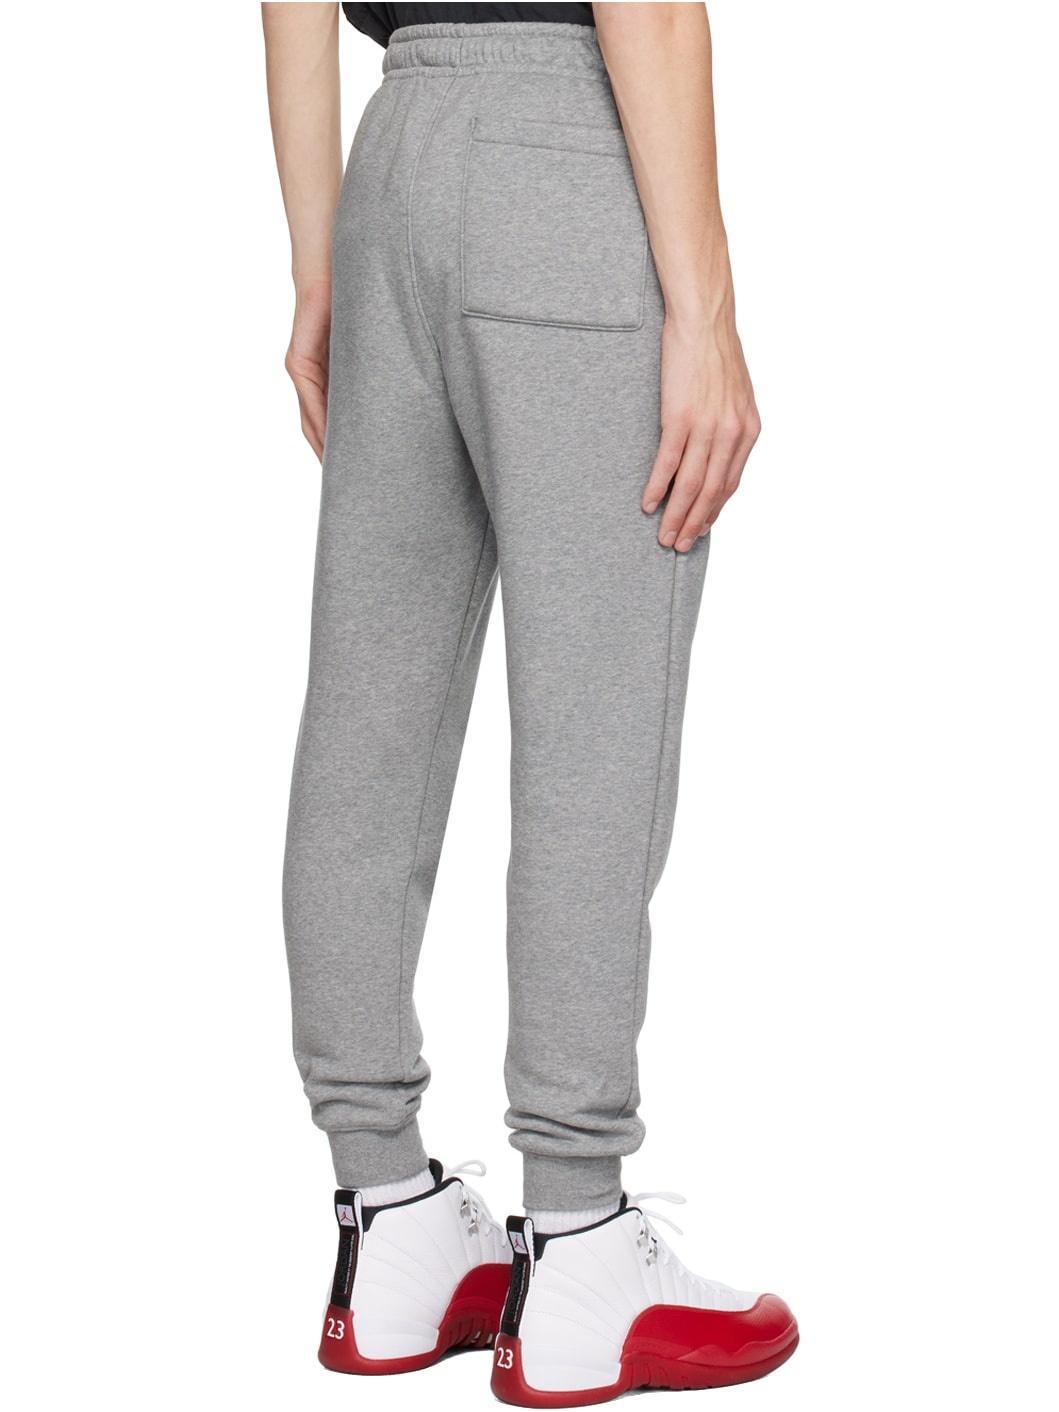 Gray Embroidered Sweatpants - 3